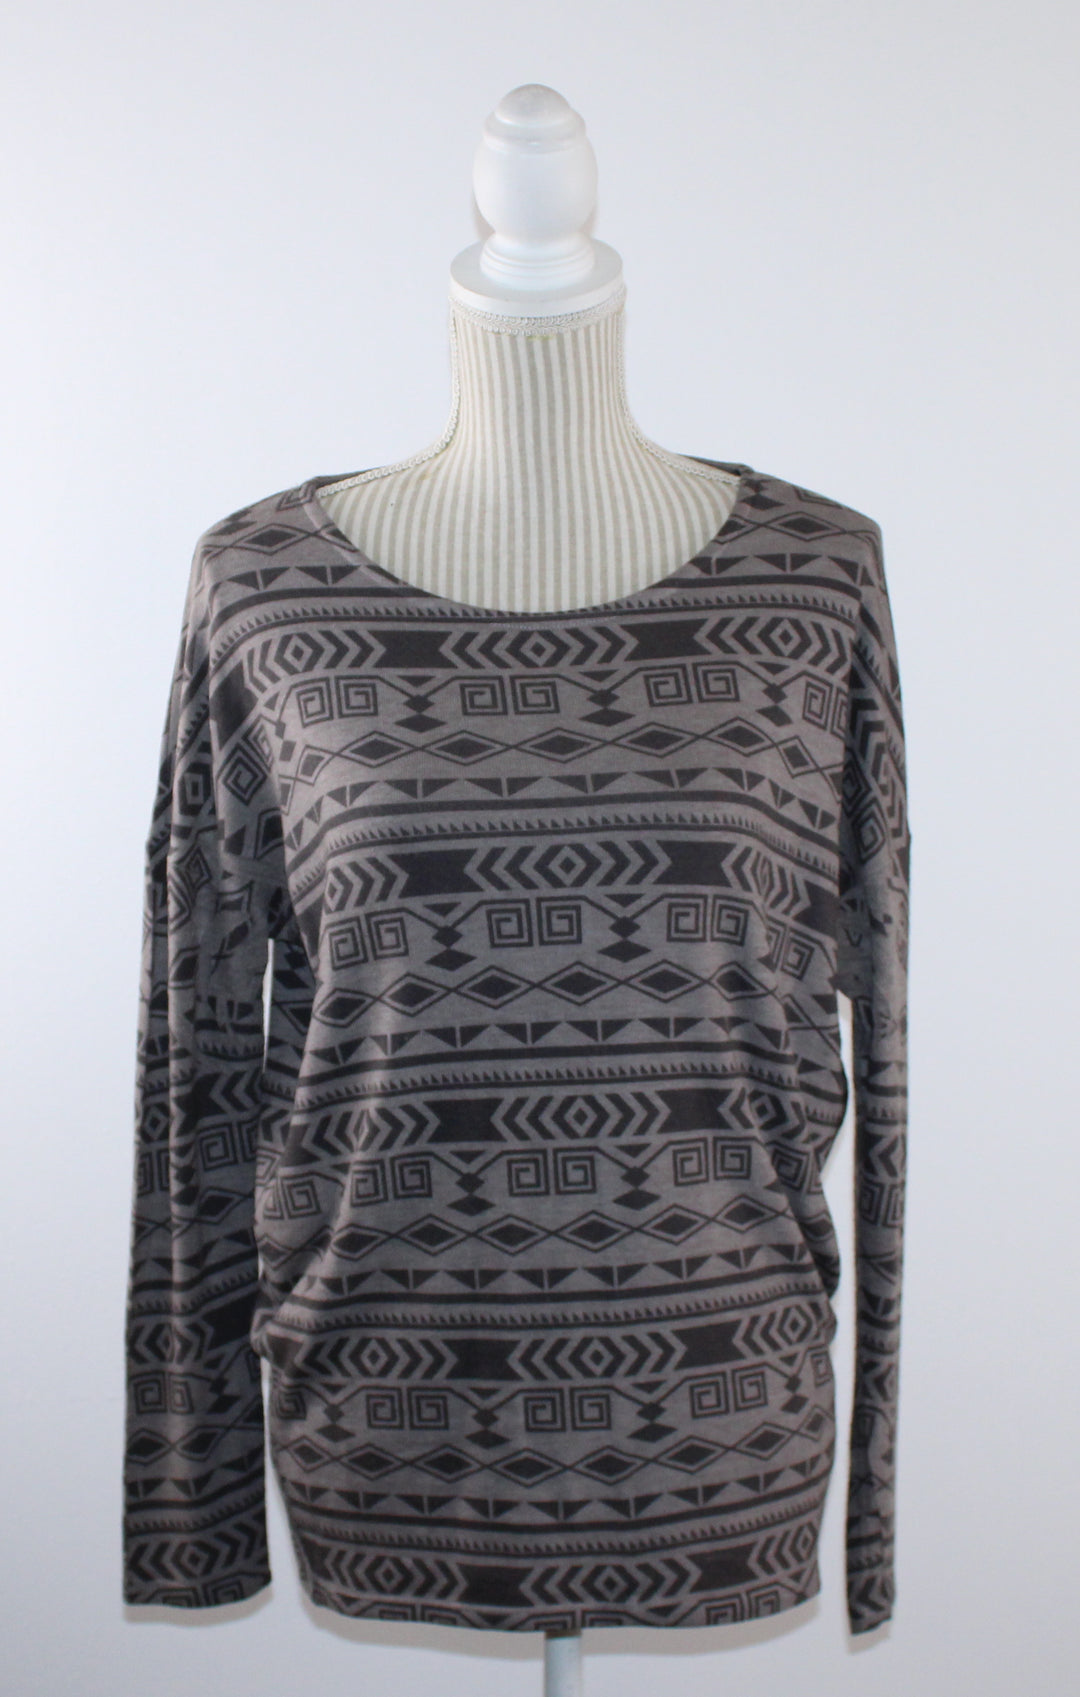 FOREVER 21 BROWN KNIT SWEATER WITH AZTEC PRINT LADIES SMALL EUC